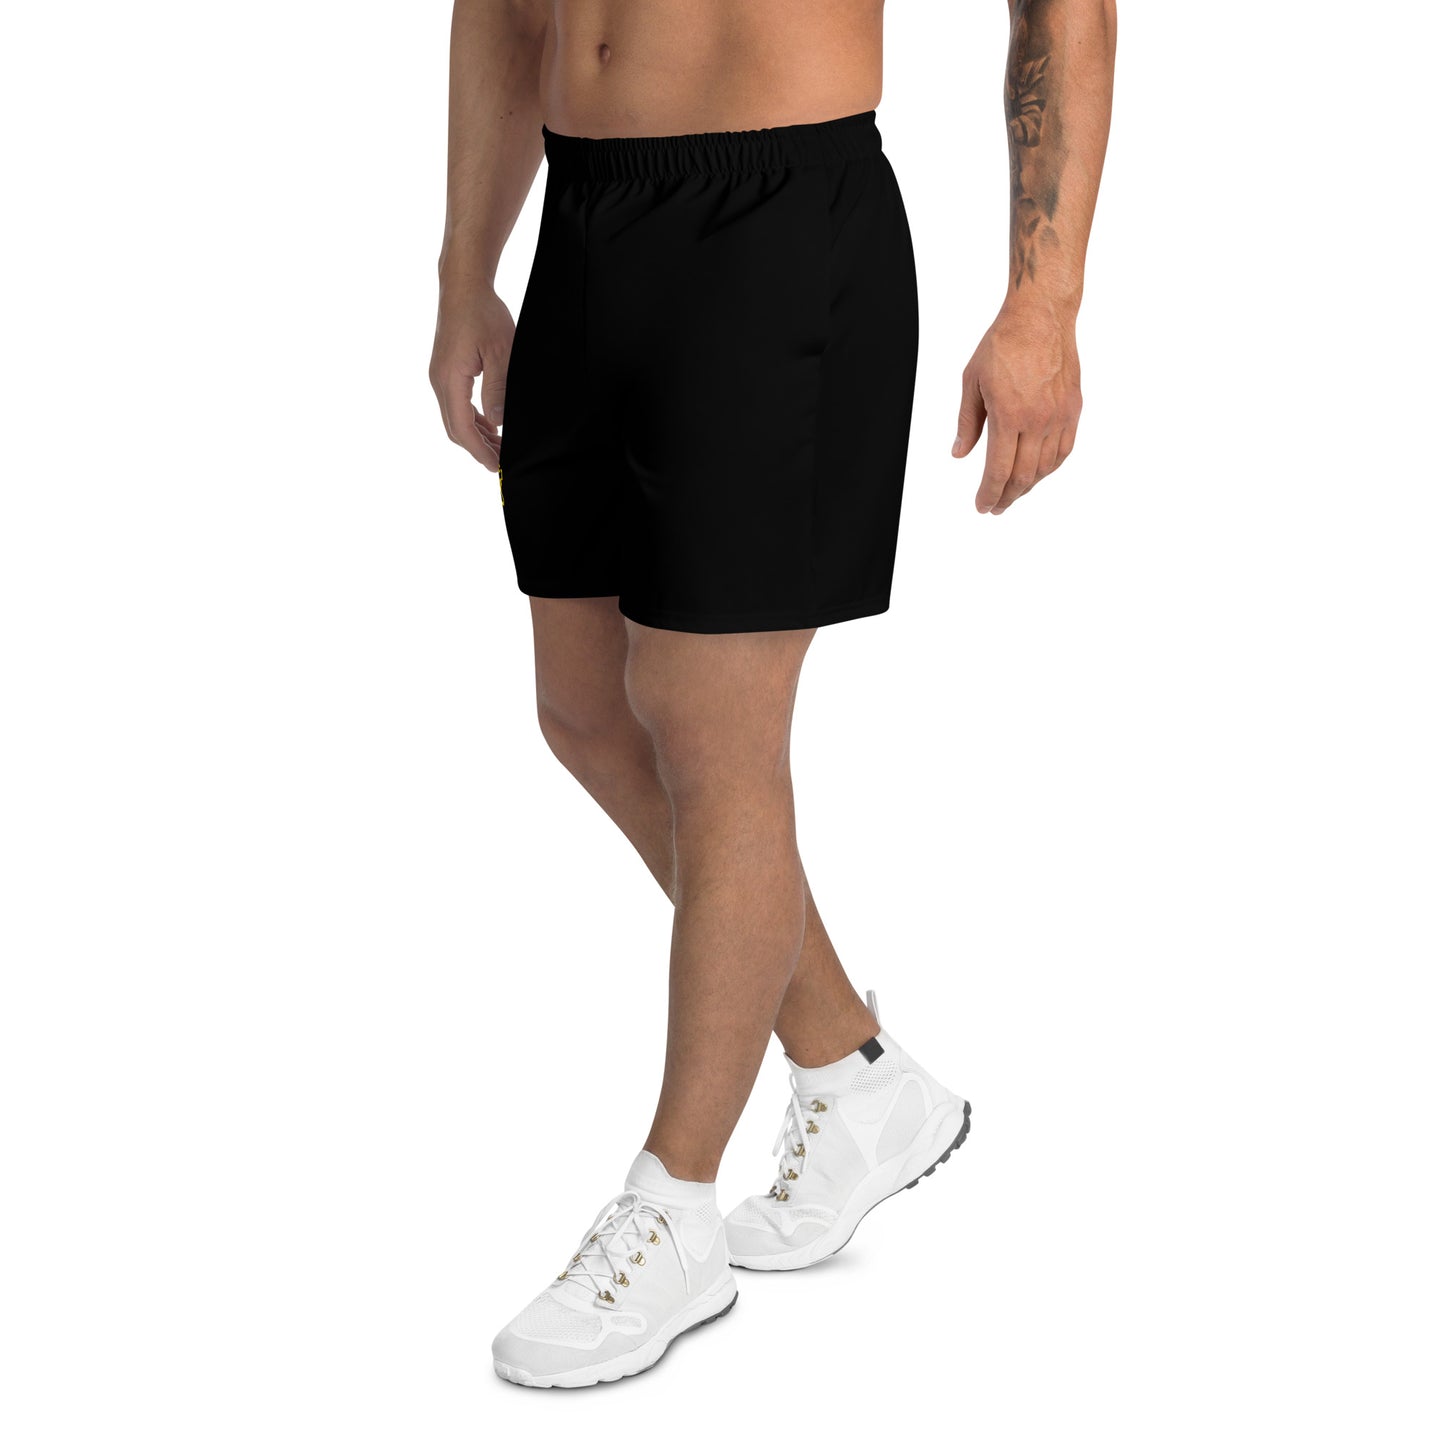 Right facing view of the black Champletes Light Speed shorts.